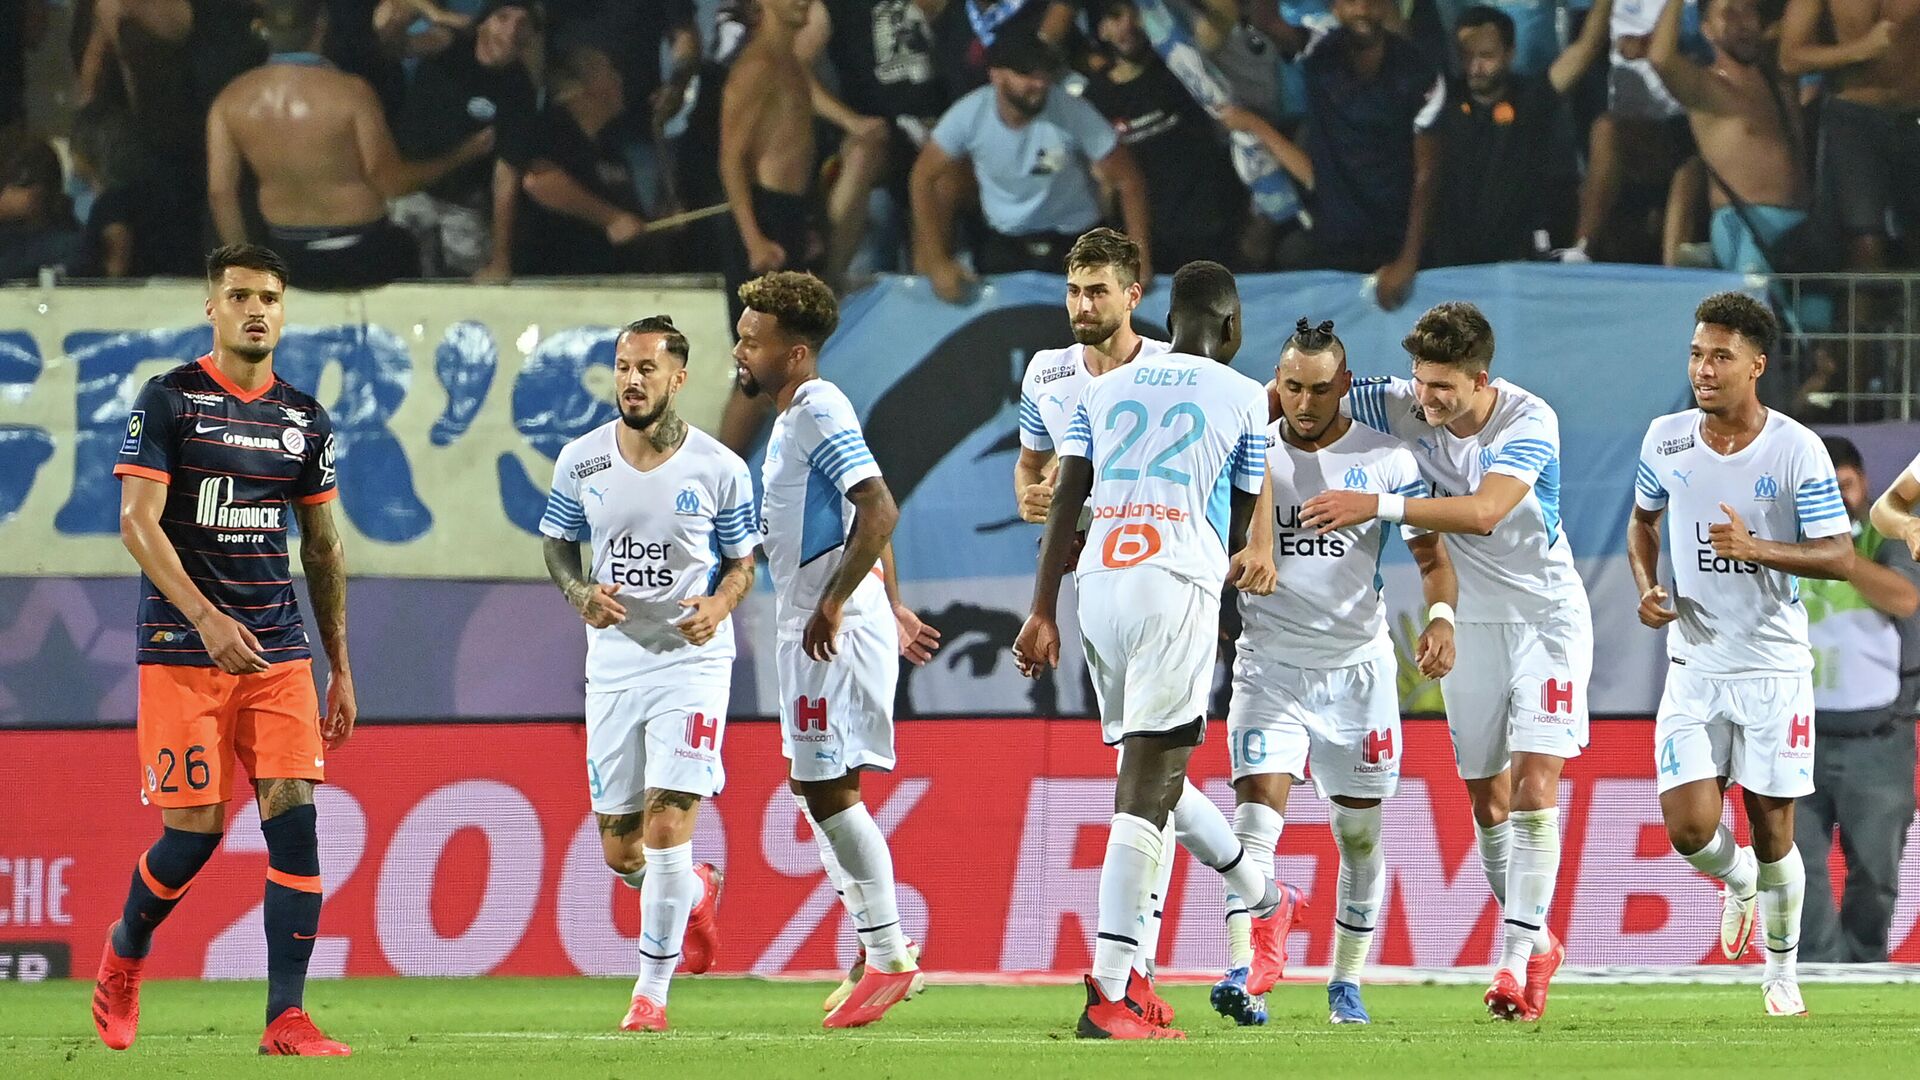 Marseille's players react after scoring a goal during the French L1 football match between Montpellier and Marseille at the Mosson stadium in Montpellier, southern France on August 8, 2021. (Photo by Pascal GUYOT / AFP) - РИА Новости, 1920, 09.08.2021